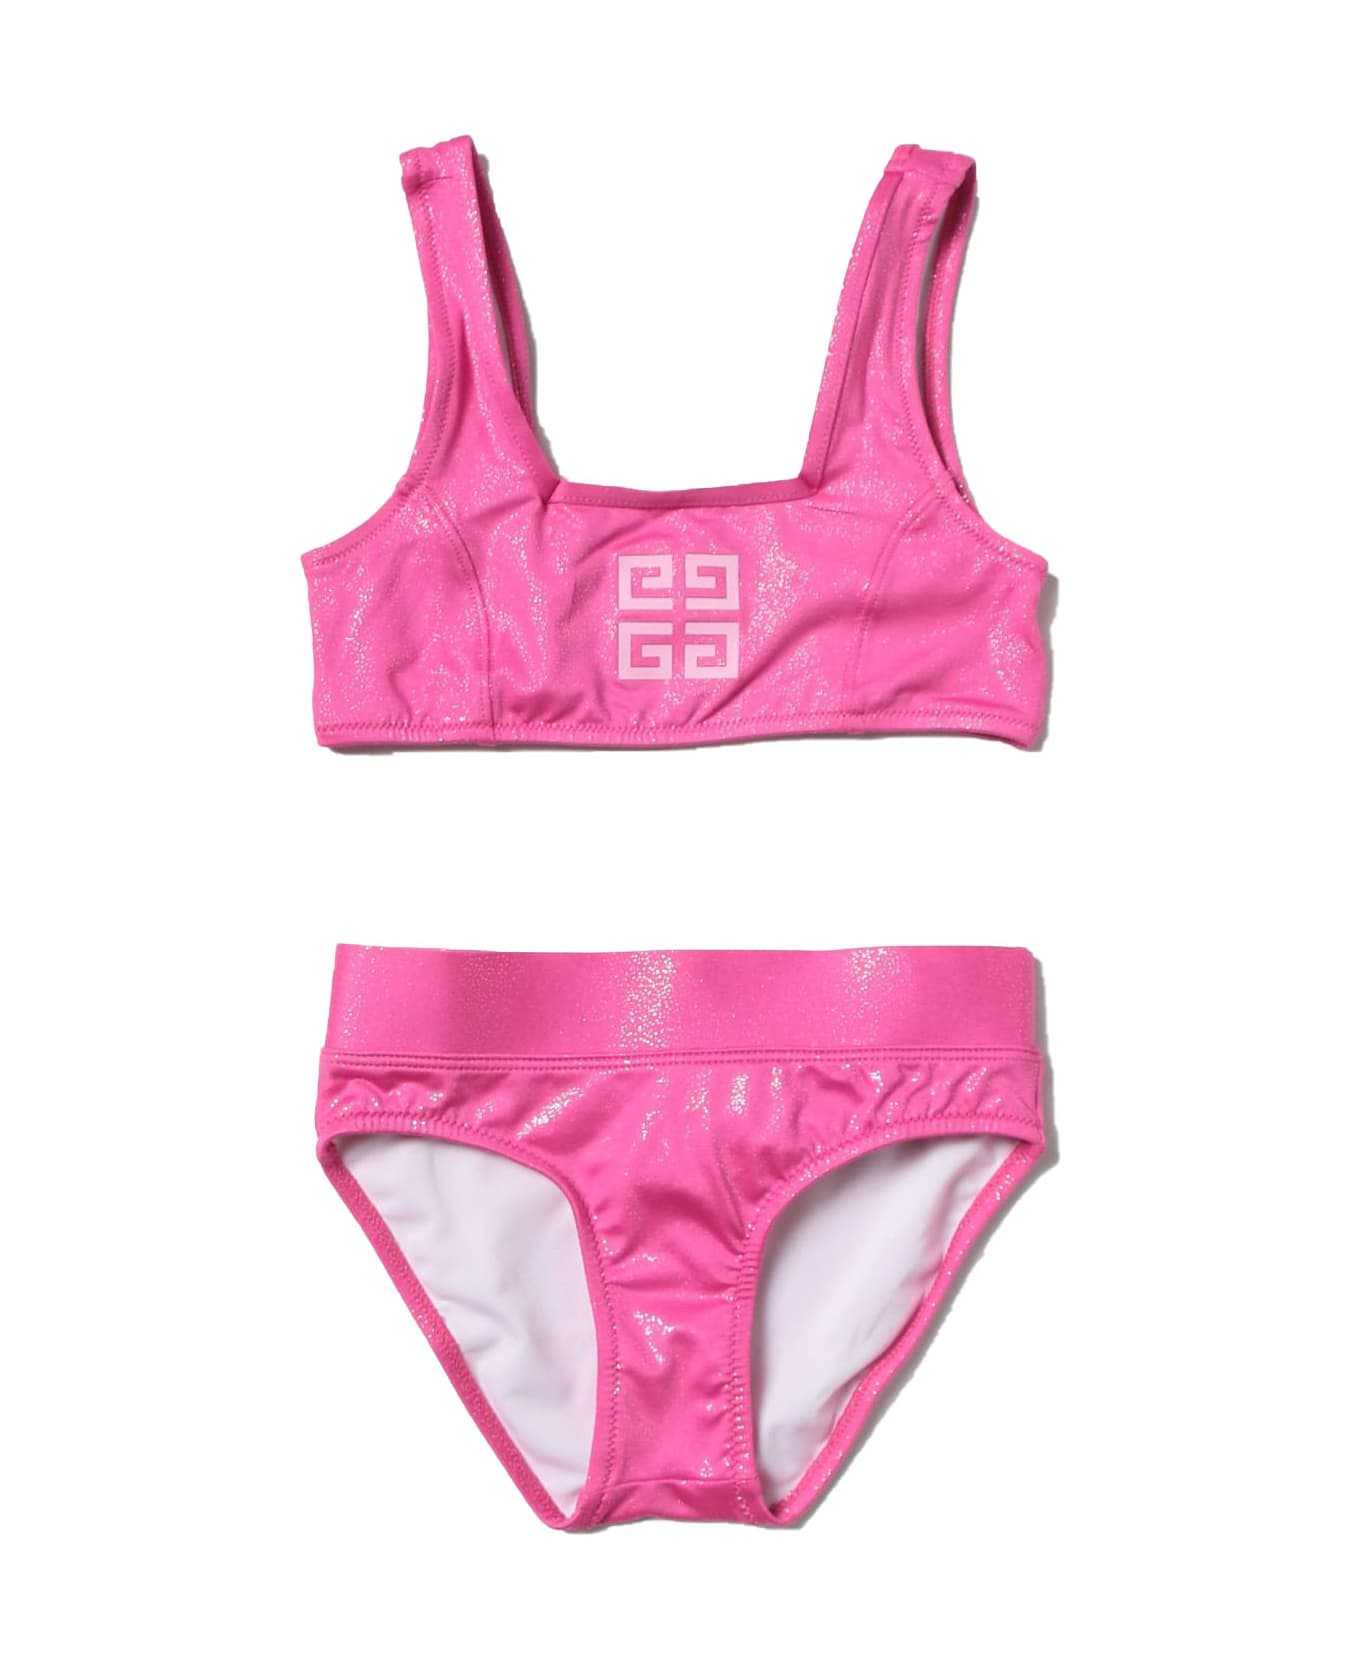 Givenchy Fuxia Polyamide Swimsuit - Fuxia